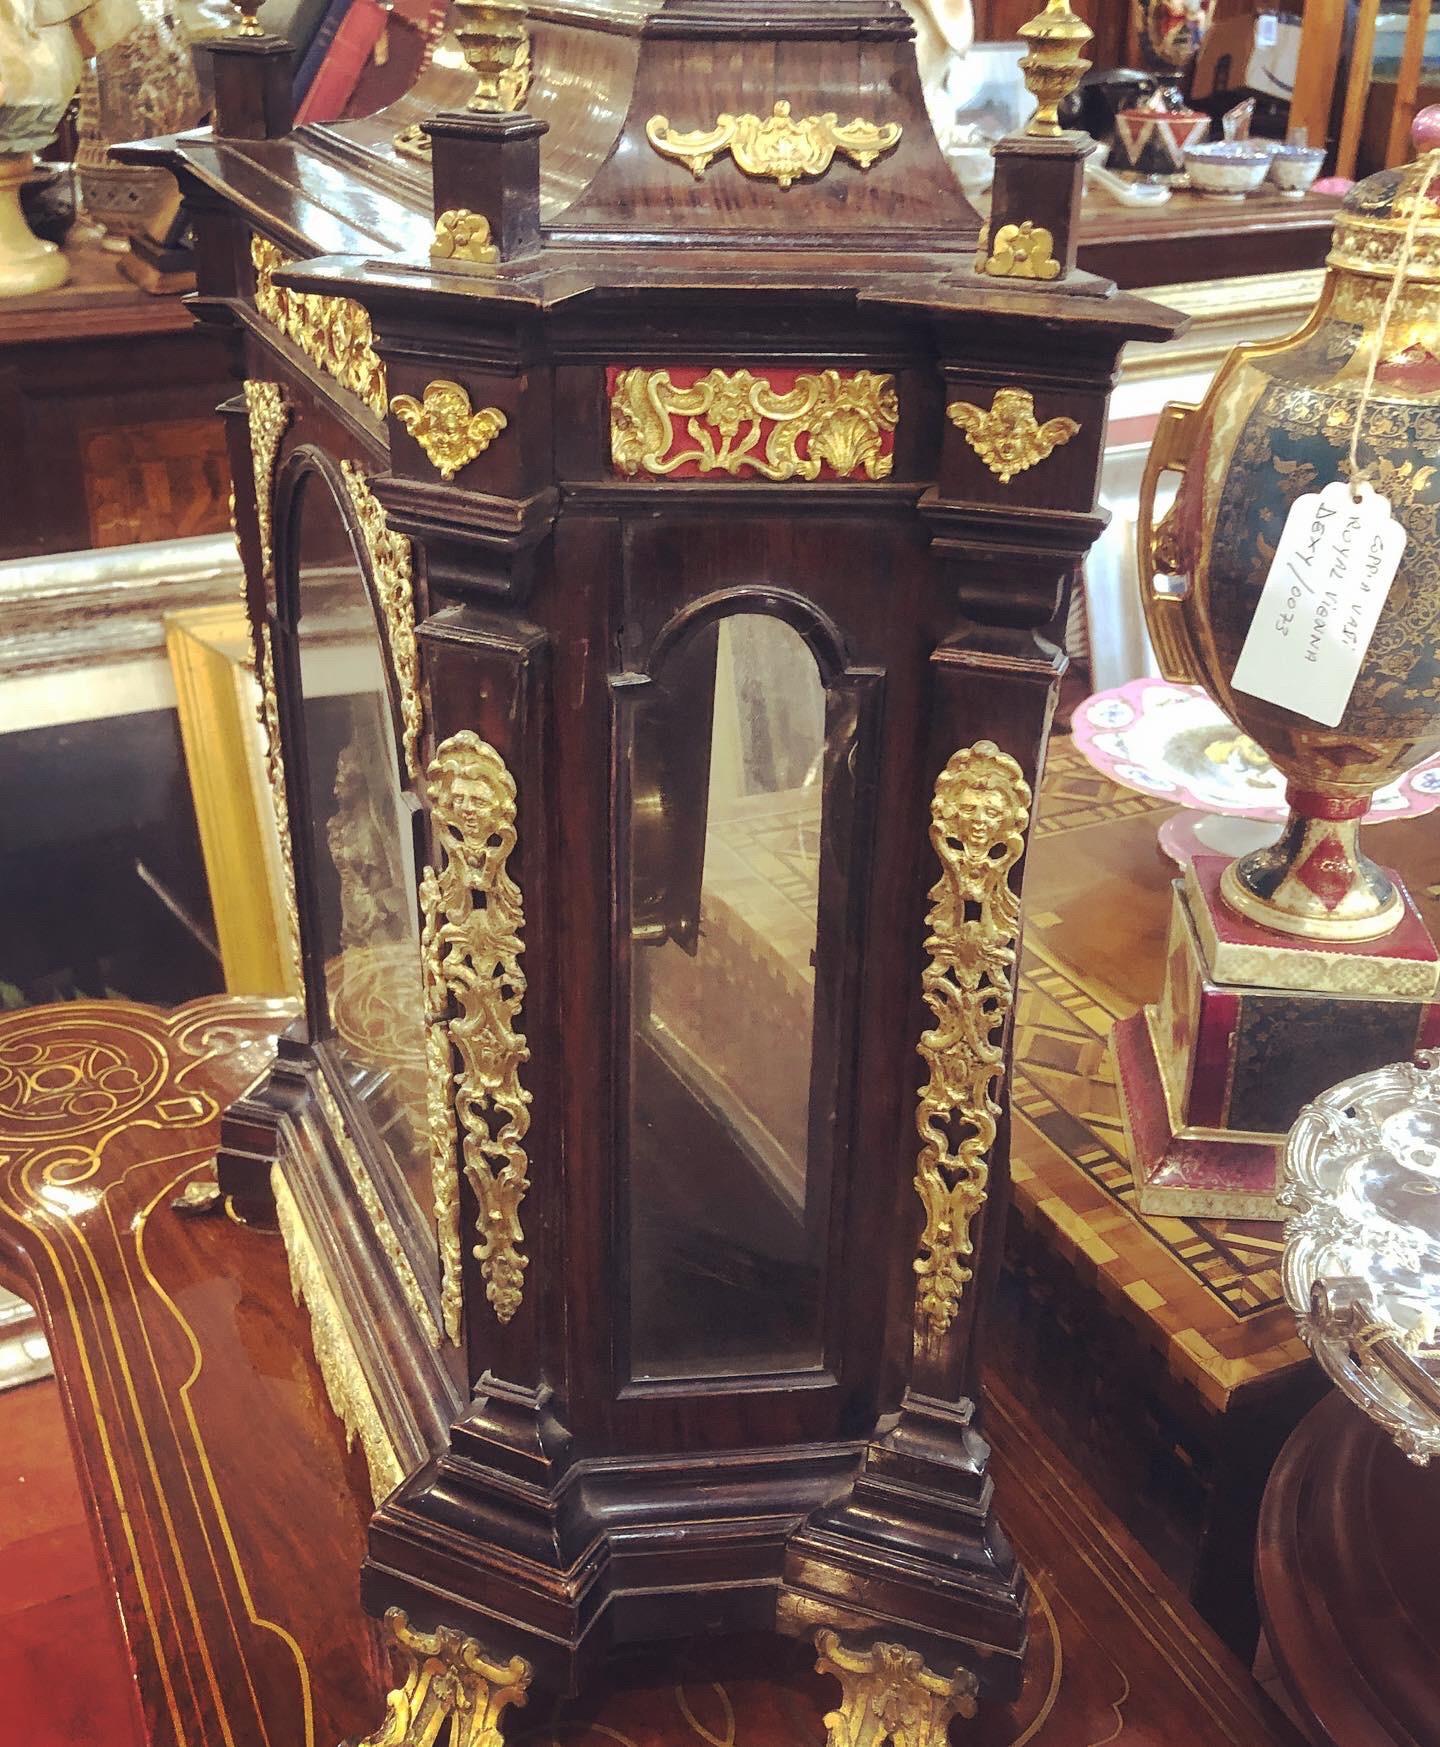 Magnificent 18th century clock, City of Rome, signed on the mechanism, Niccola Amonier Roma, incredible workmanship. Walnut with rich applications of chiselled and gilded bronze.
News on page 12, in 